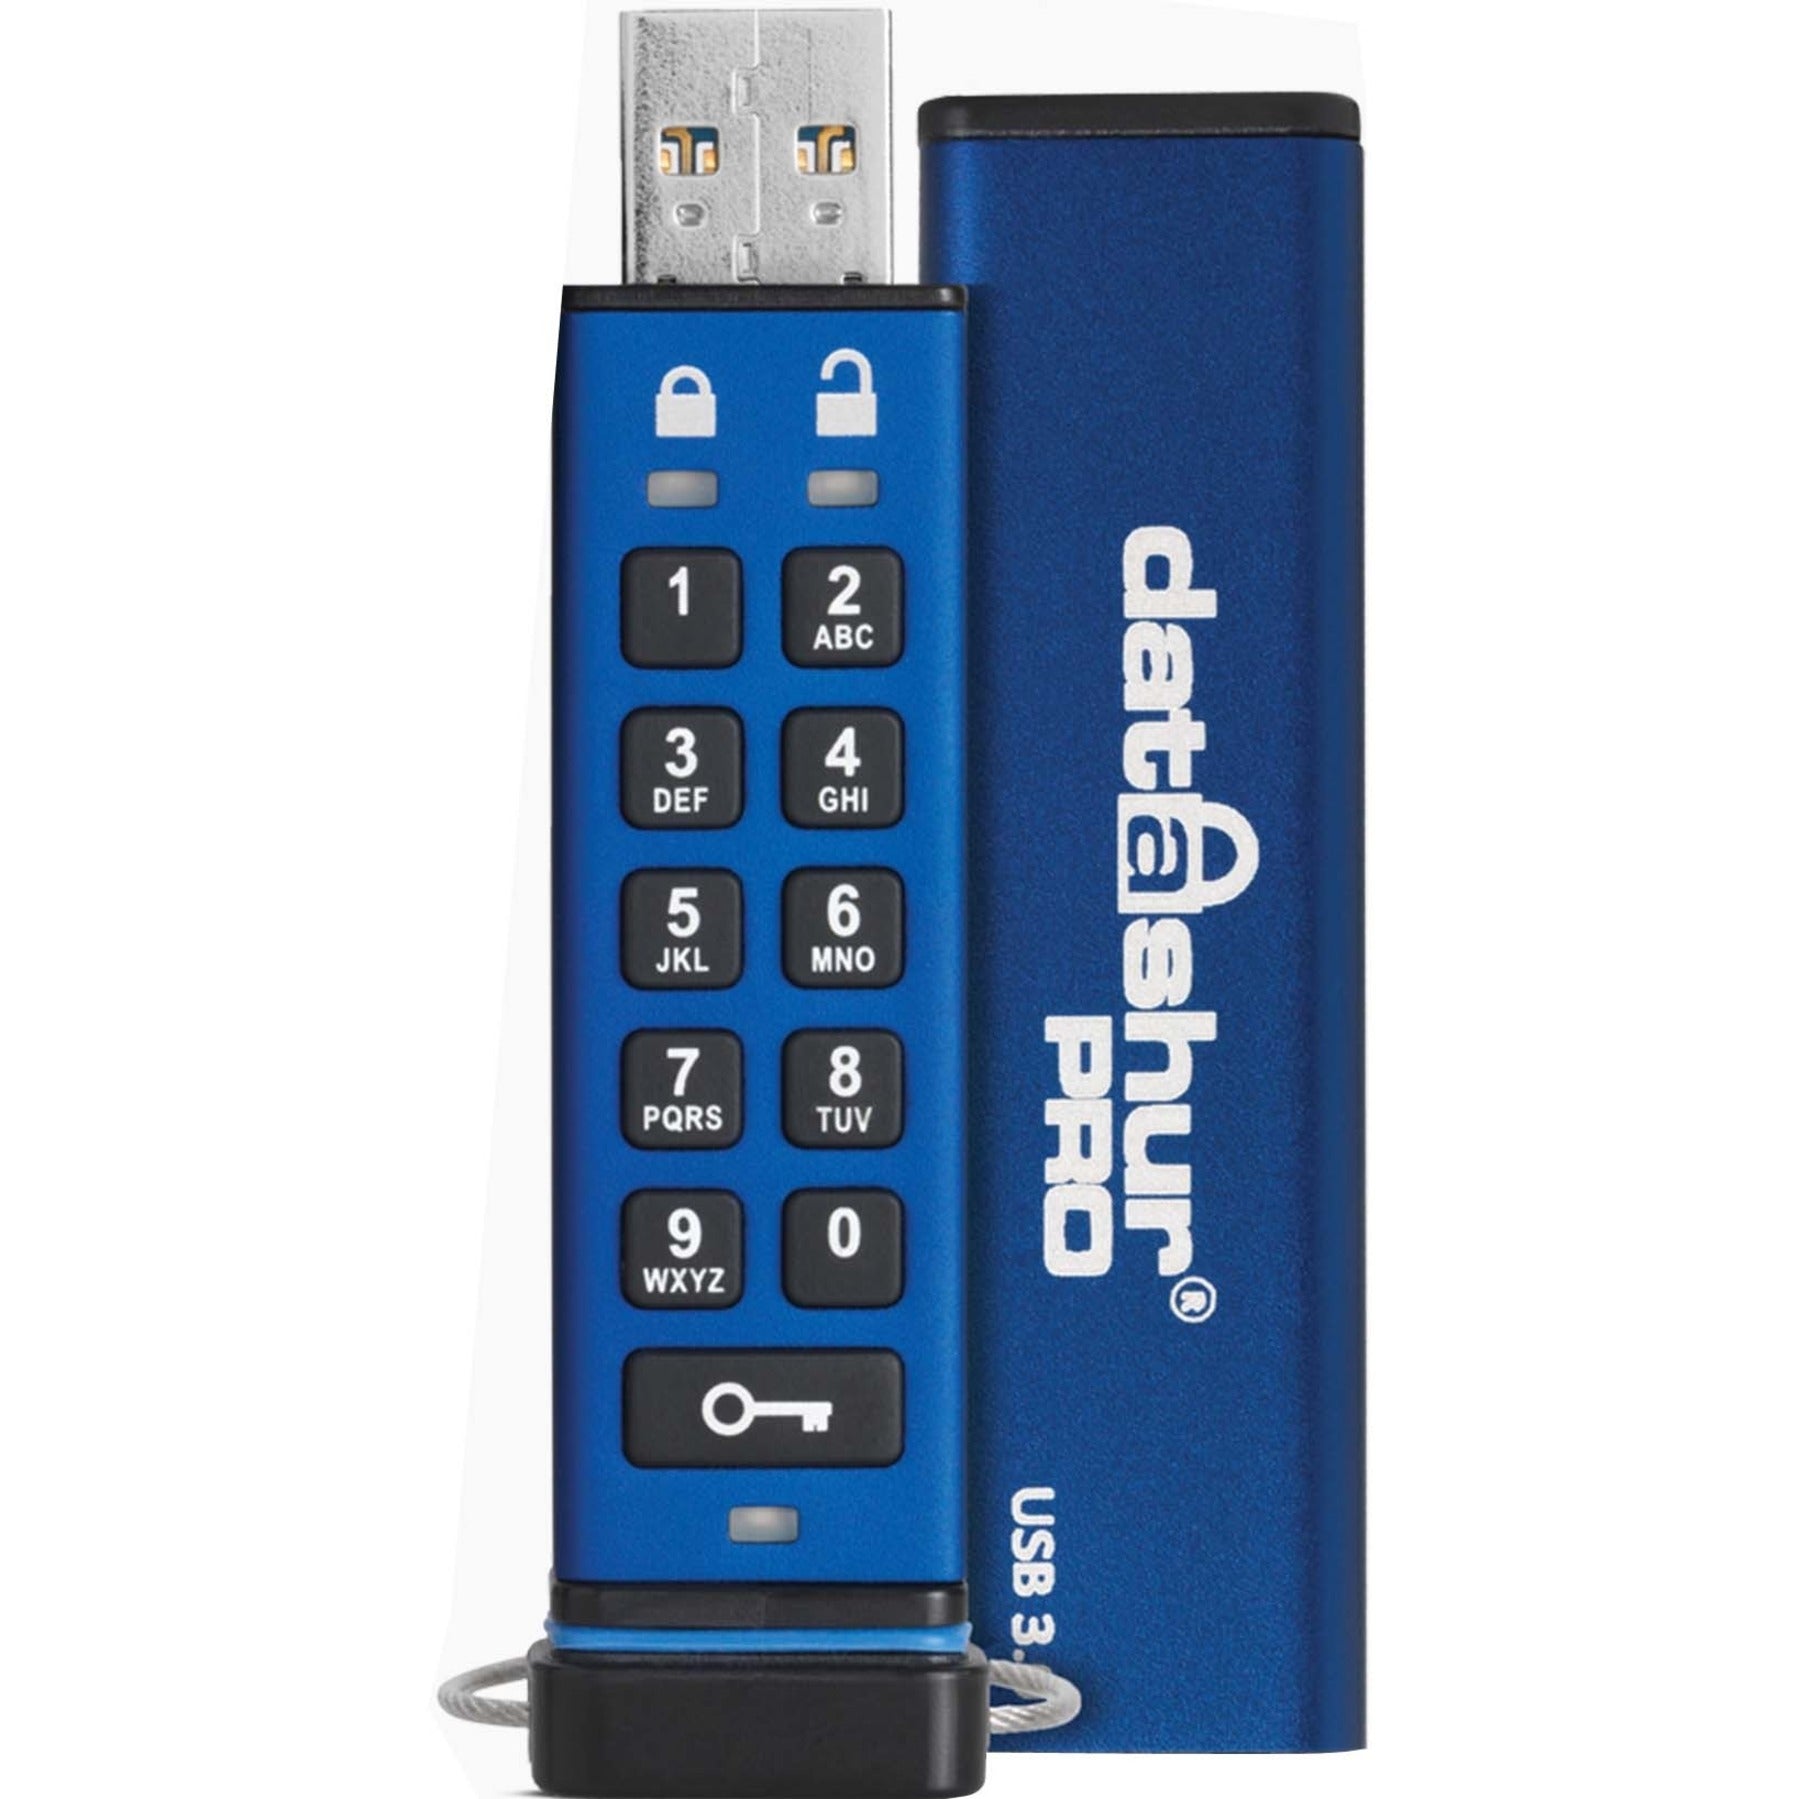 iStorage IS-FL-DA3-256-16 datAshur PRO 16GB USB 3.2 (Gen 1) Type A Flash Drive, Secure, FIPS 140-2 Level 3 Certified, Password Protected, Dust/Water Resistant